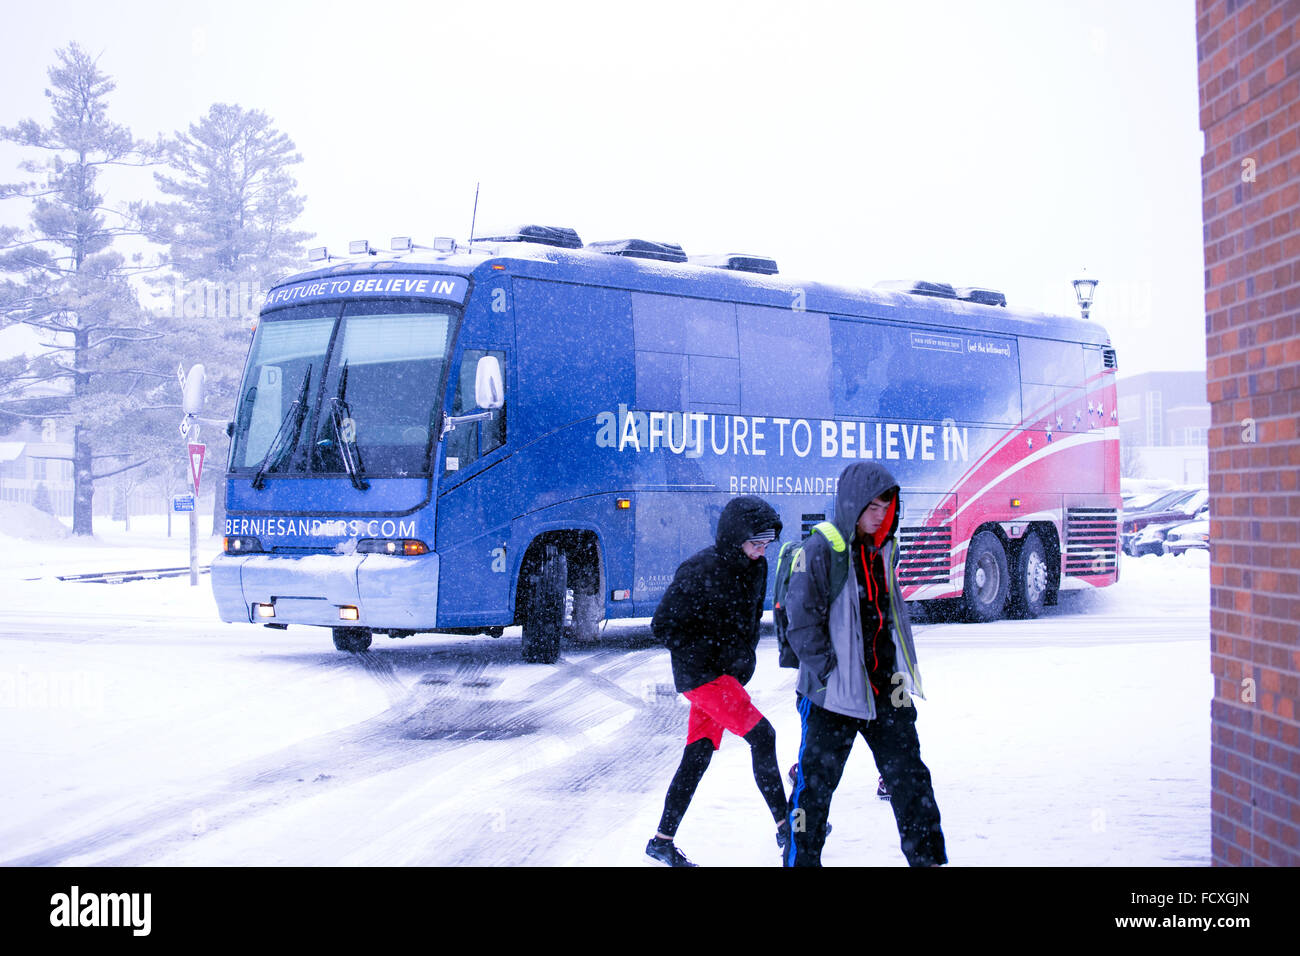 Grinnell, Iowa, USA.  25th January 2016.   Bernie Sander's campaign bus at rally on a snowy day. Credit:  CJH Photography LLC/Alamy Live News. Stock Photo